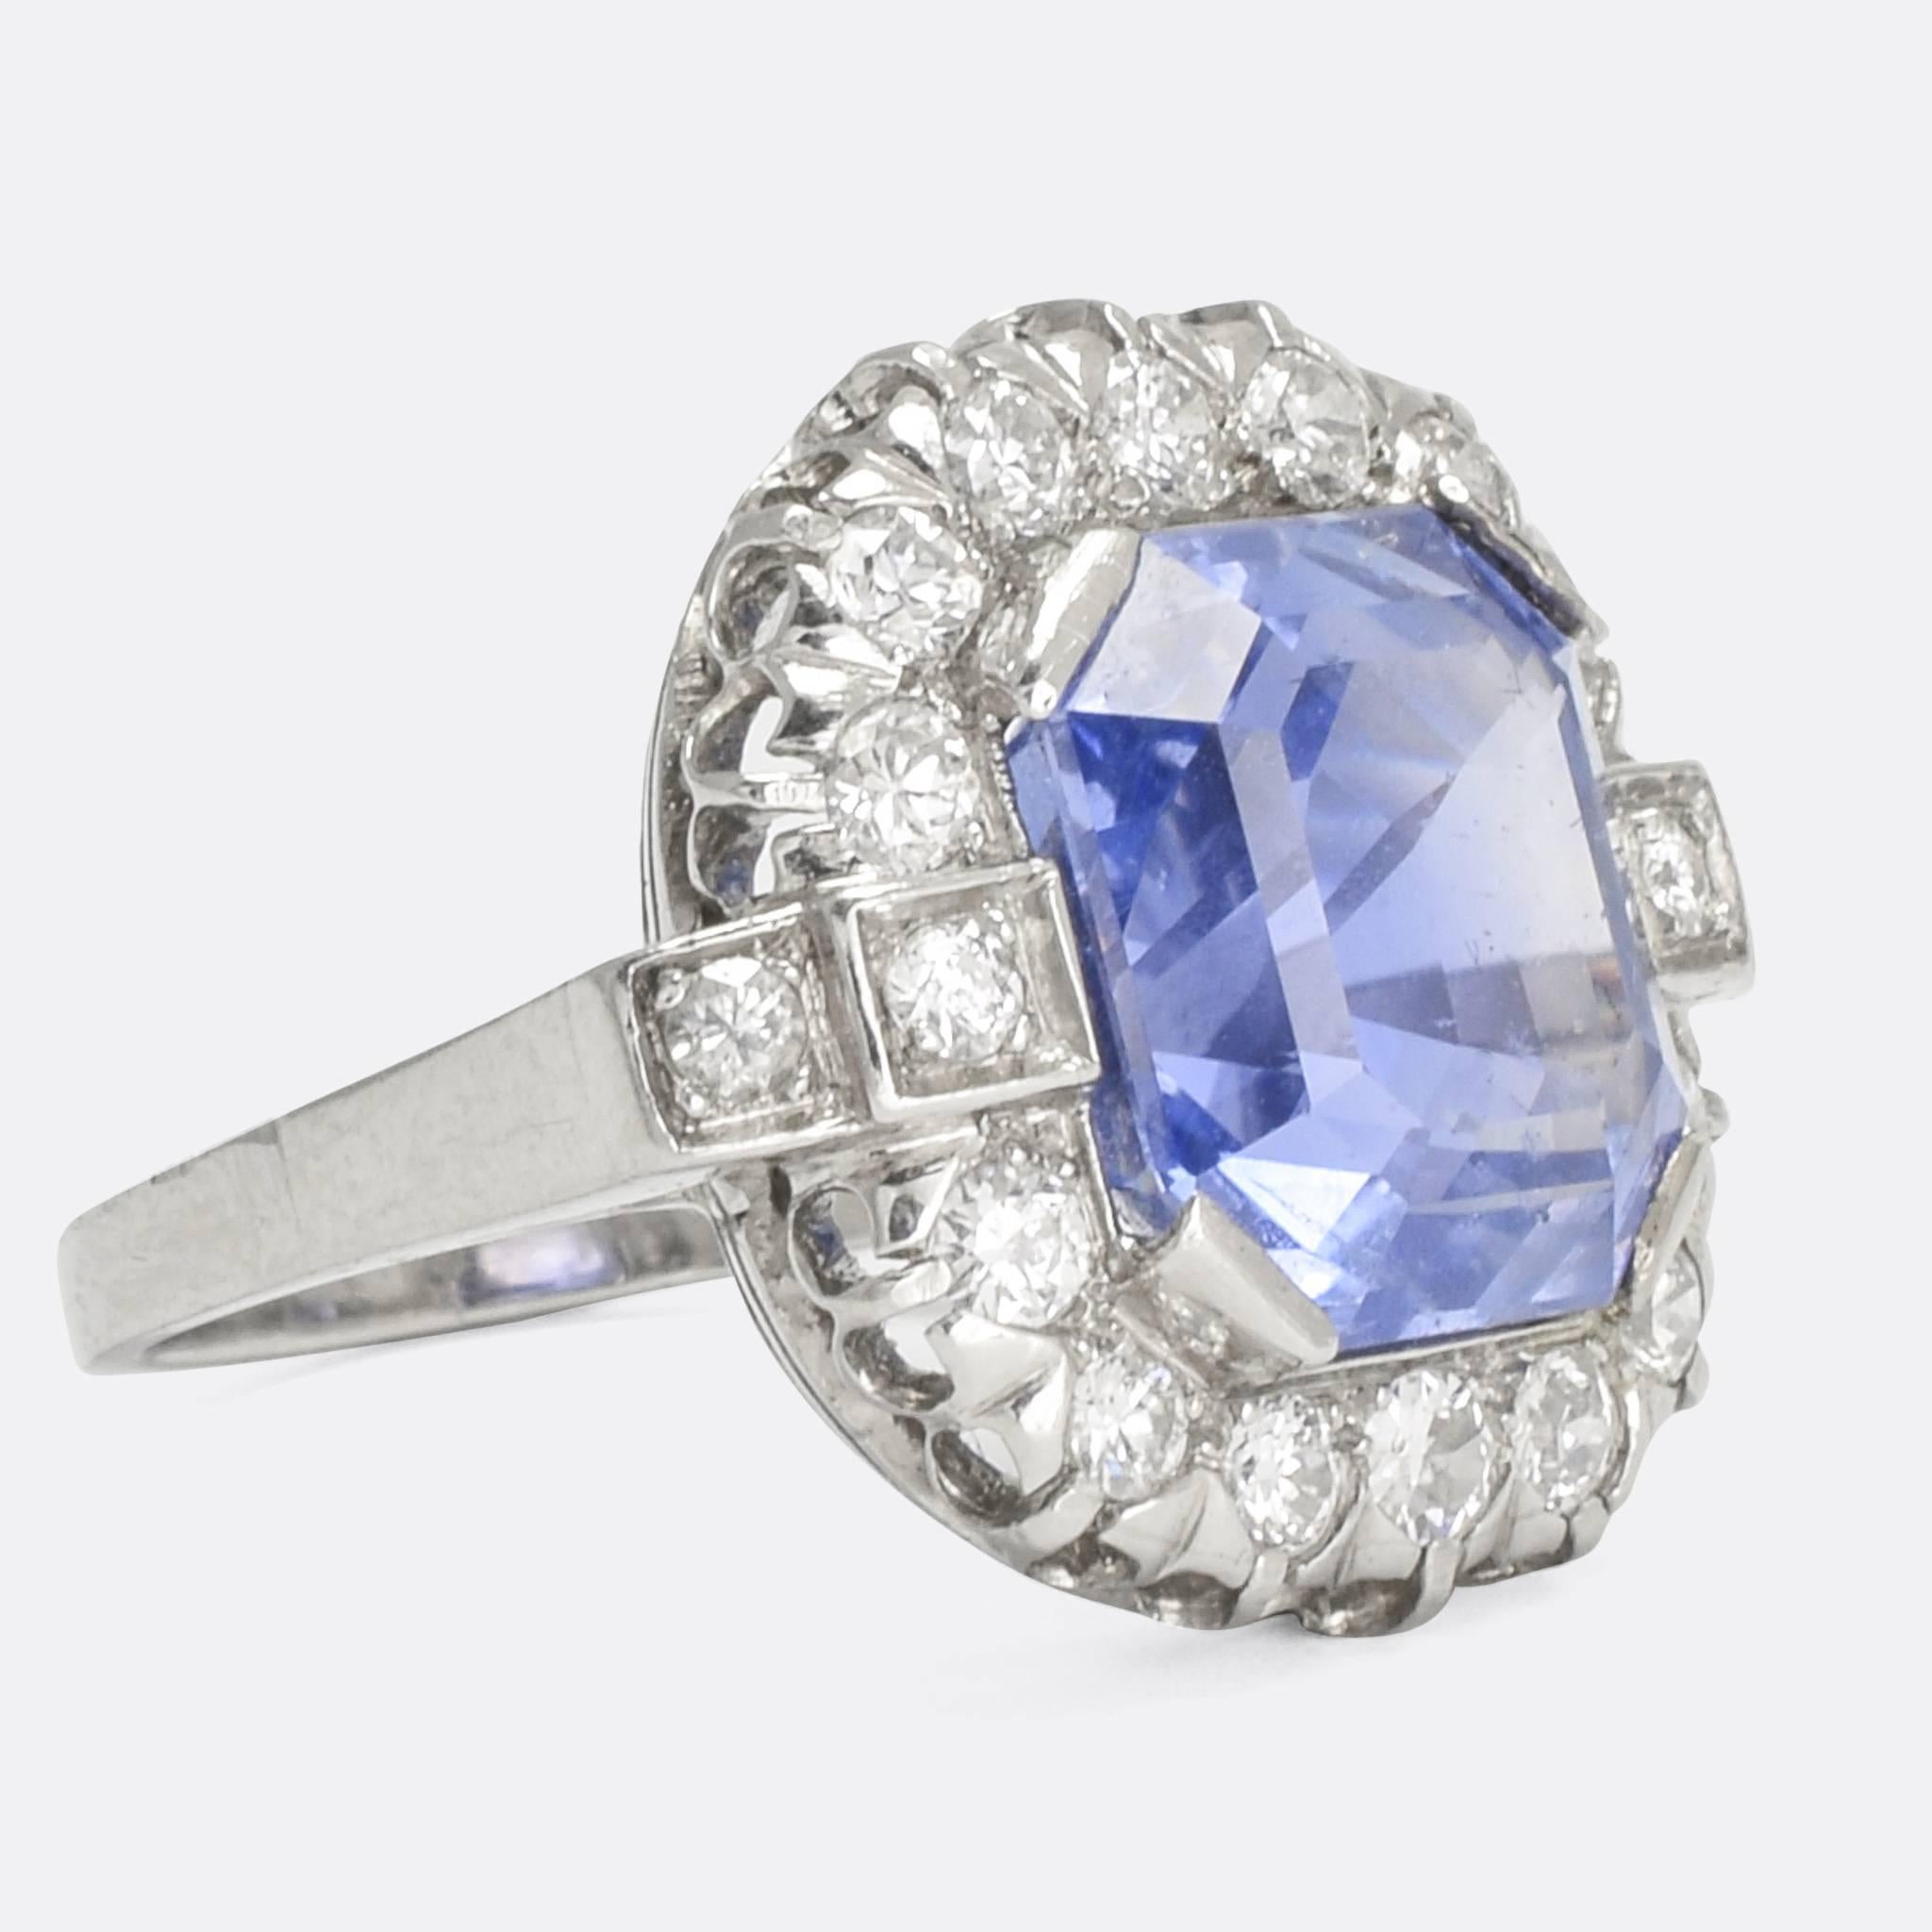 An extraordinary French Art Deco masterpiece, this 1930s cluster ring is absolutely stunning. The principal stone is a 7.79 carat natural Ceylon Sapphire (no heat), with exceptional colour and a perfect cut. It's surrounded by a cluster of brilliant